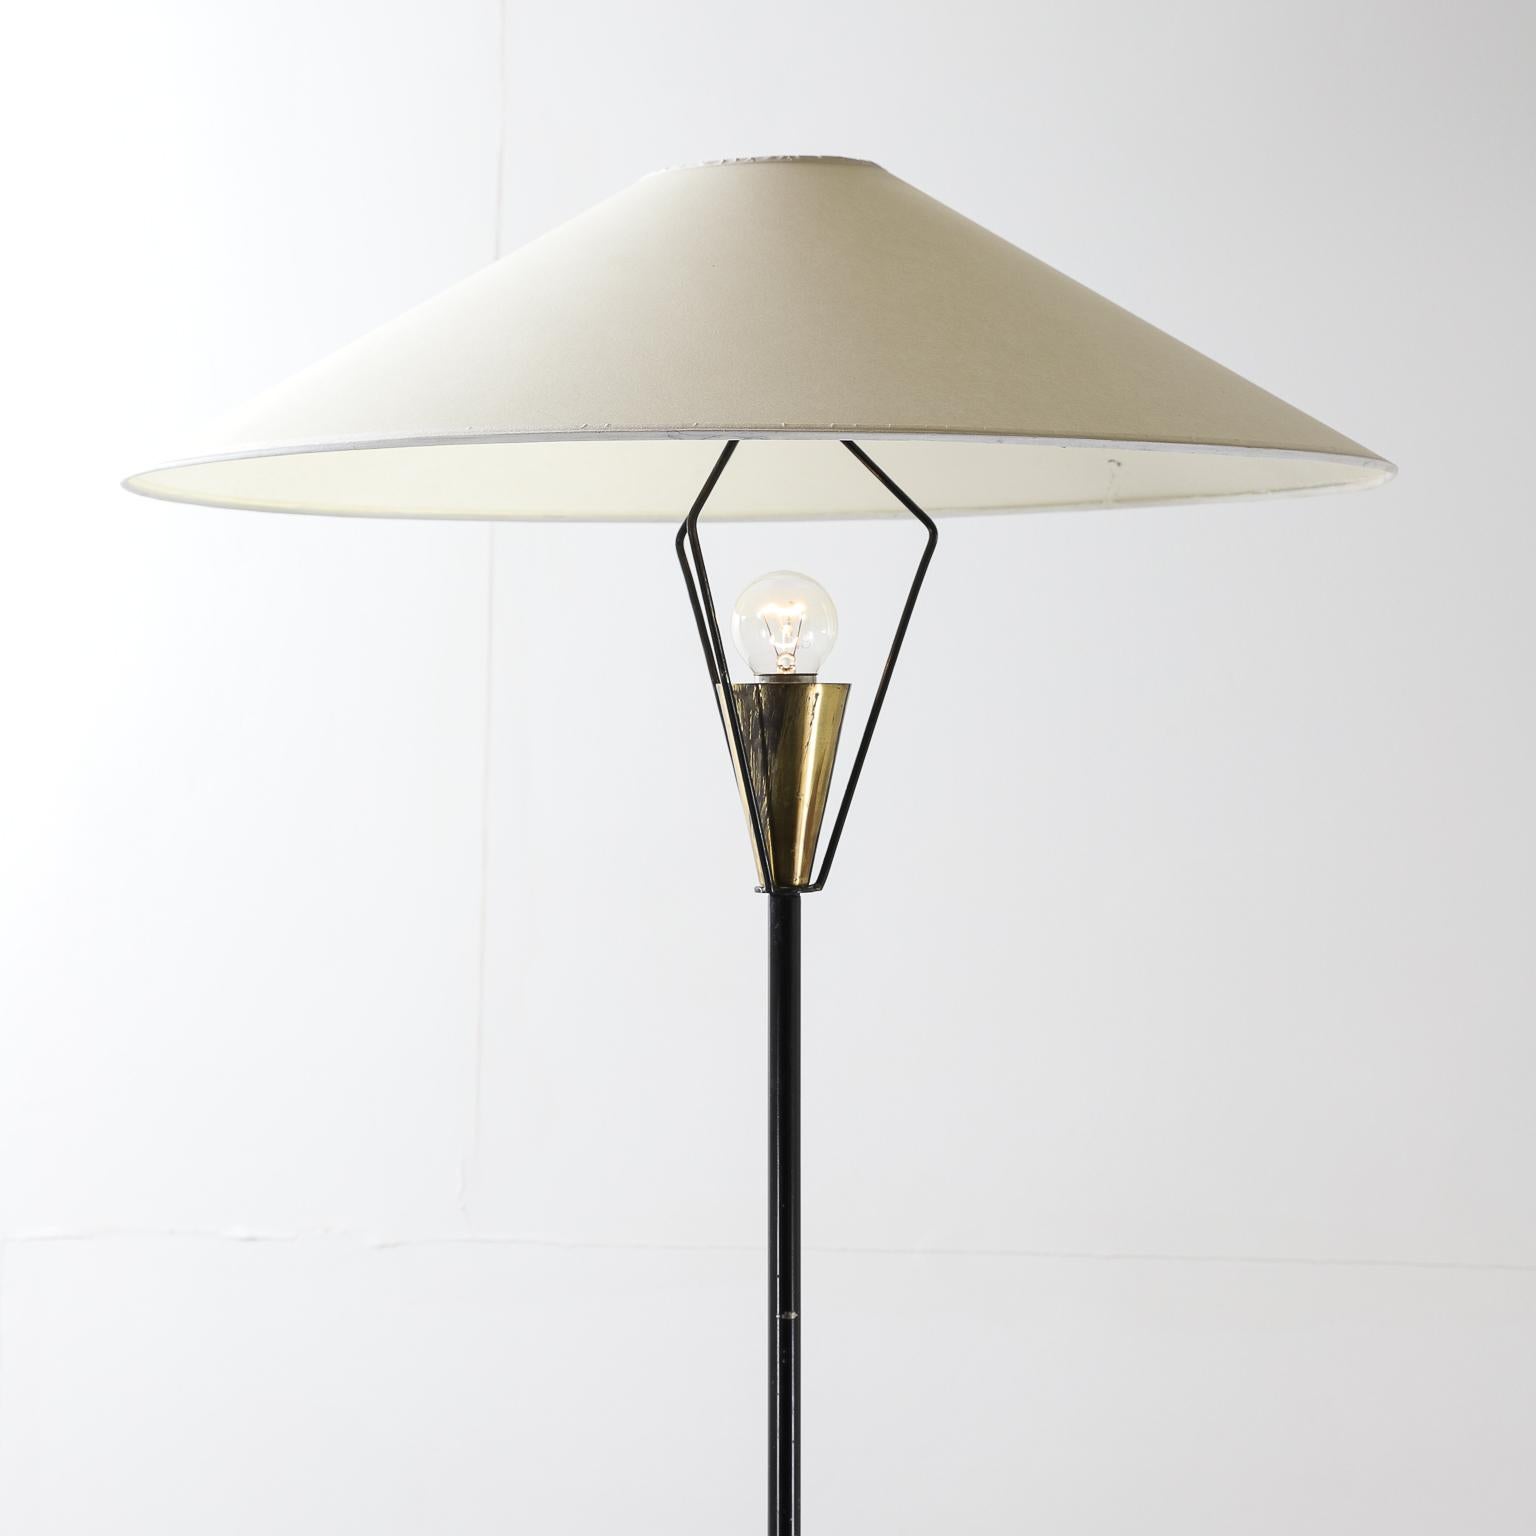 Italian midcentury blackened brass floor lamp with antique brass finished details.